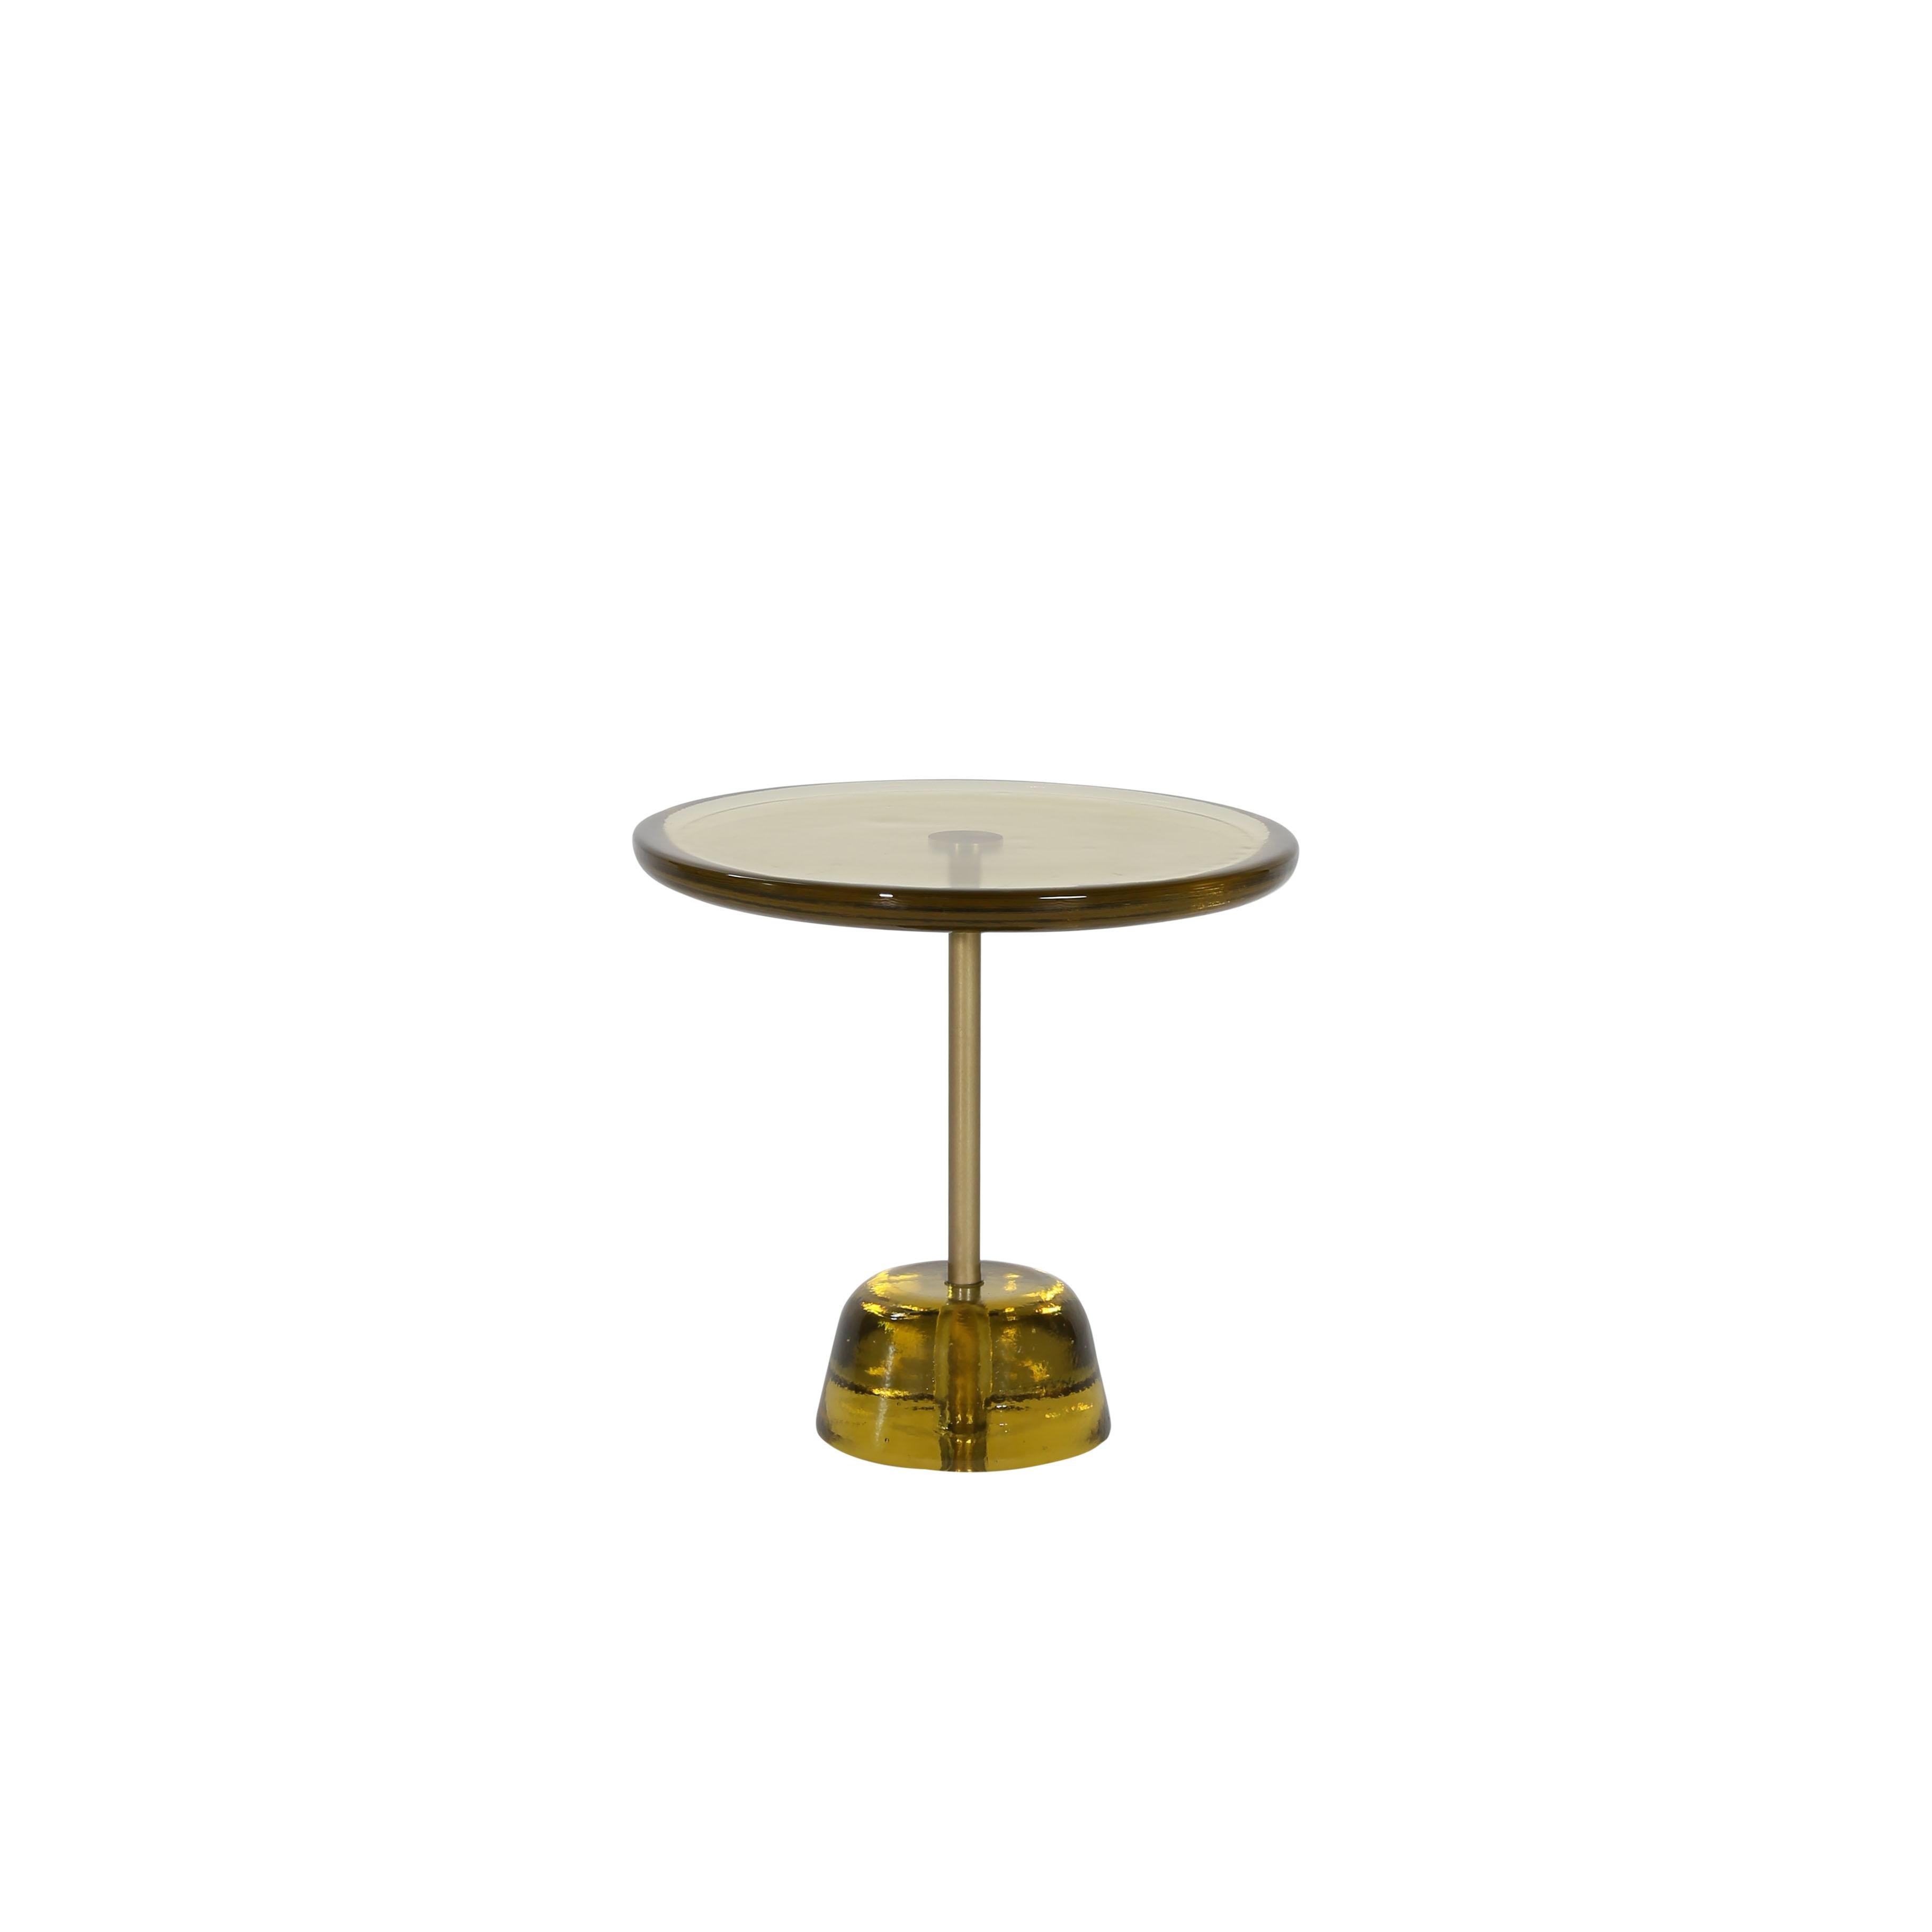 Pina low corn yellow brass side table by Pulpo
Dimensions: D44 x H42 cm.
Materials: glass; brass and steel

Also available in different colours. 

Sebastian Herkner’s distinctively tall, skinny side table series pina is inspired by the